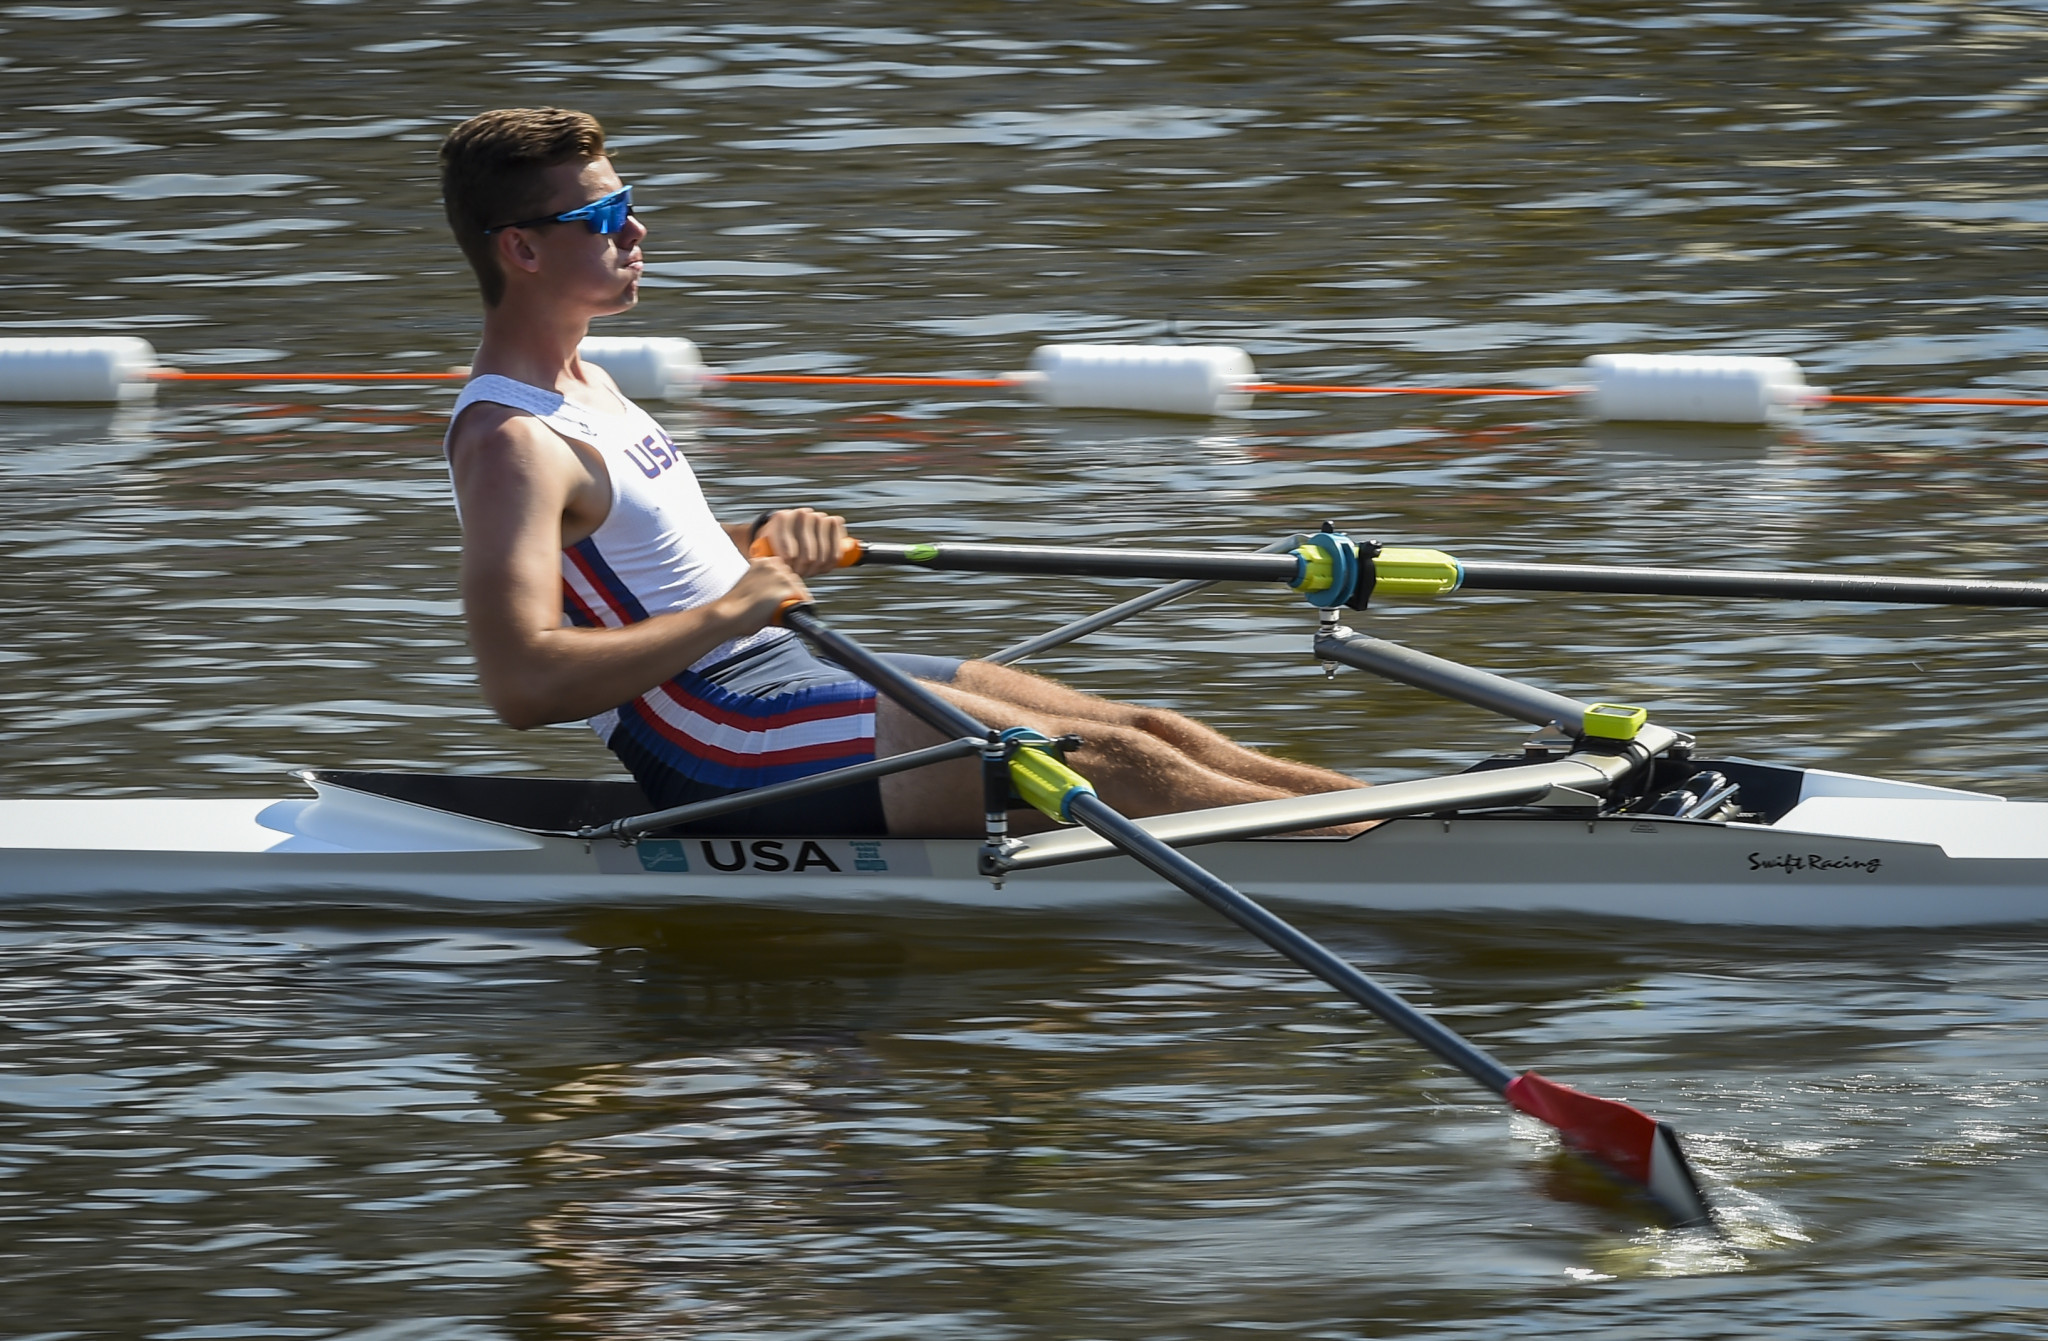 Americas Olympic and Paralympic rowing qualifier to get underway in Rio de Janeiro